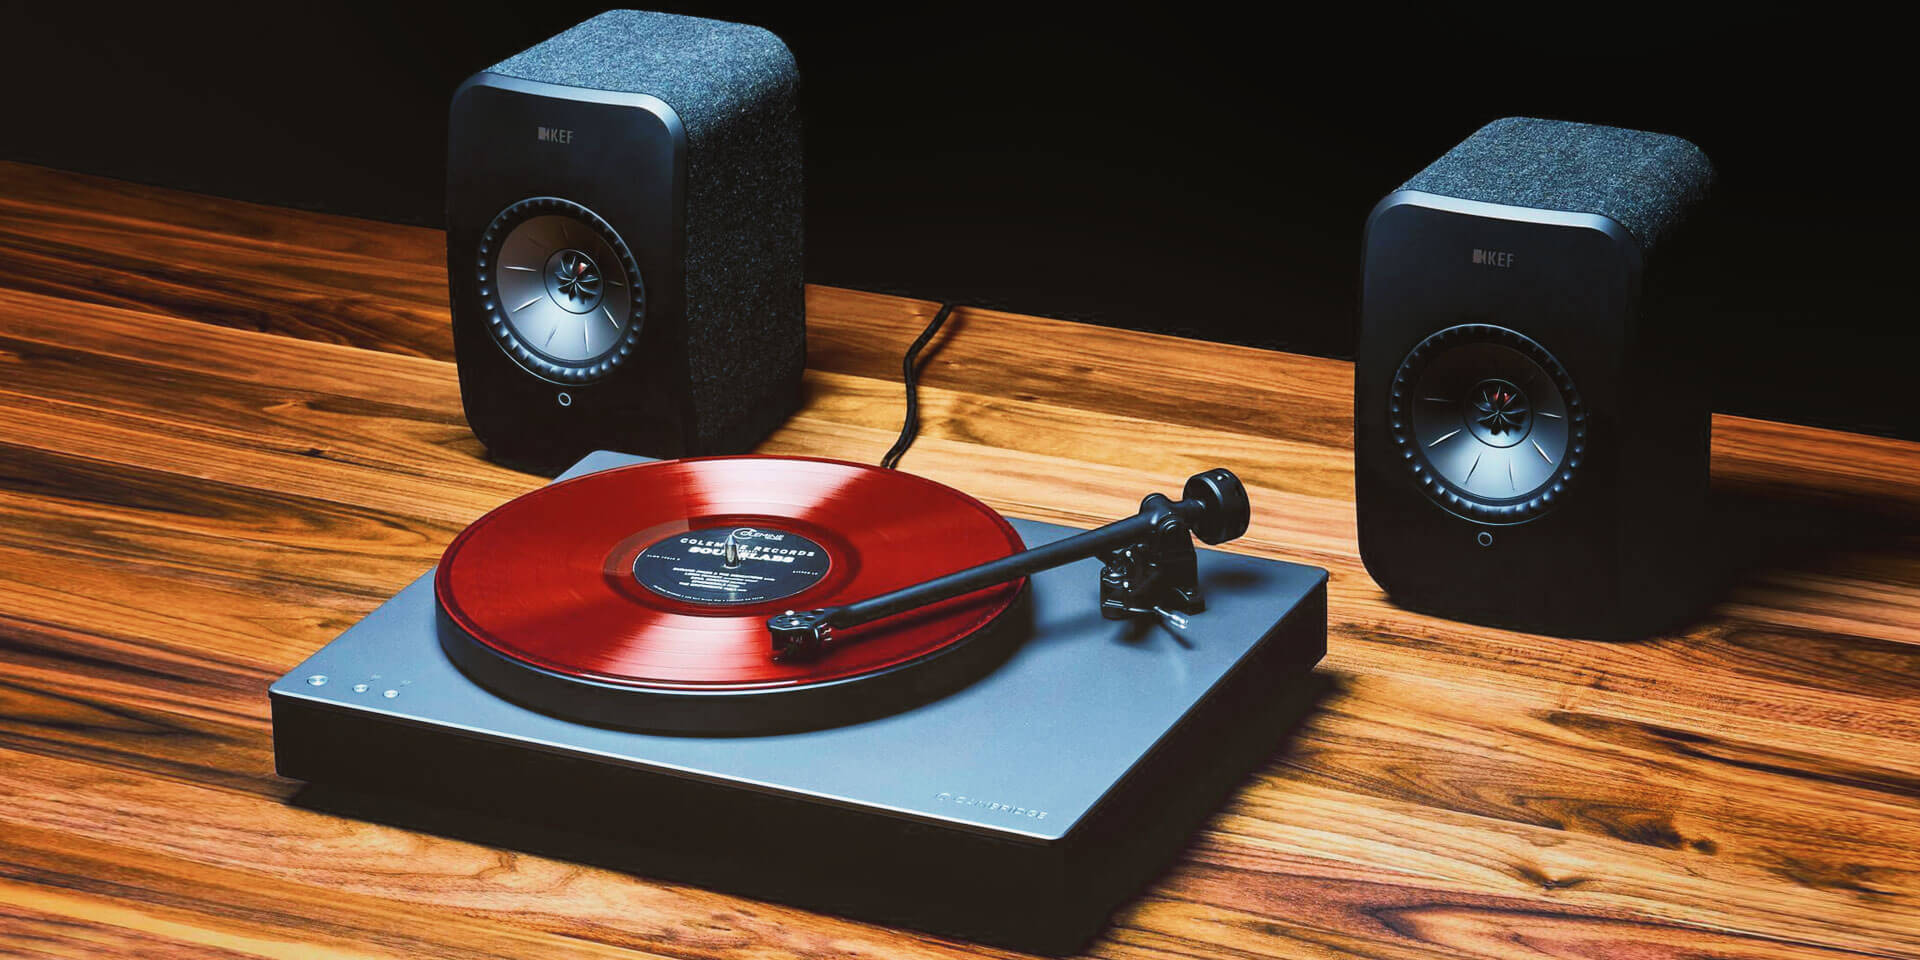 How to connect a turntable to an AV receiver